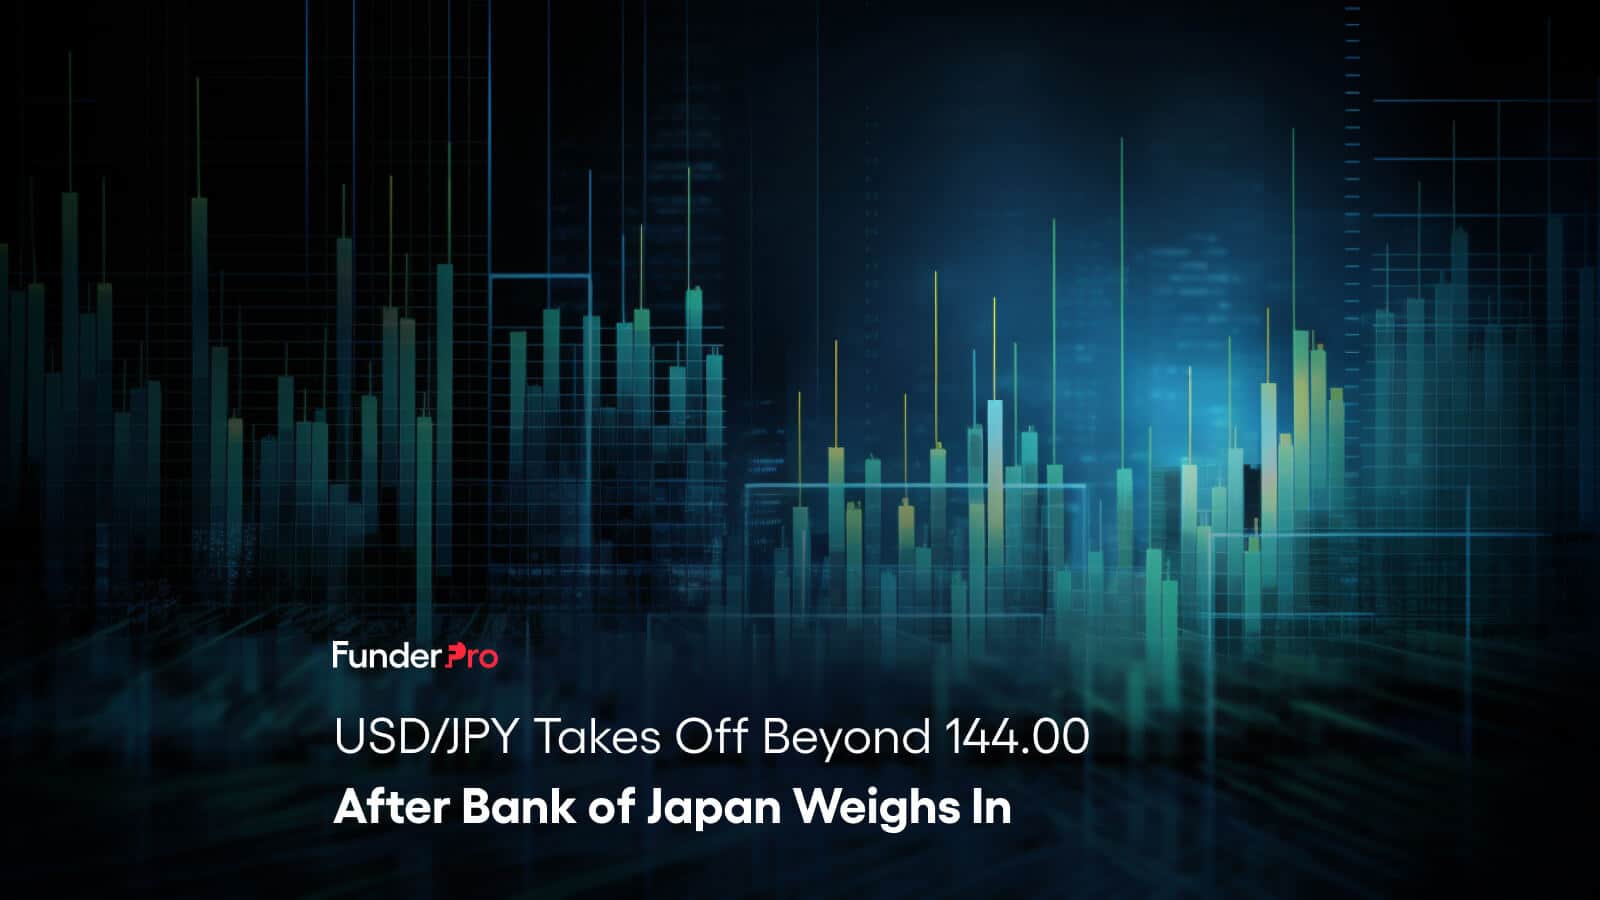 The Japanese yen sold off in early trading on Wednesday, continuing its downward trajectory from earlier this week.